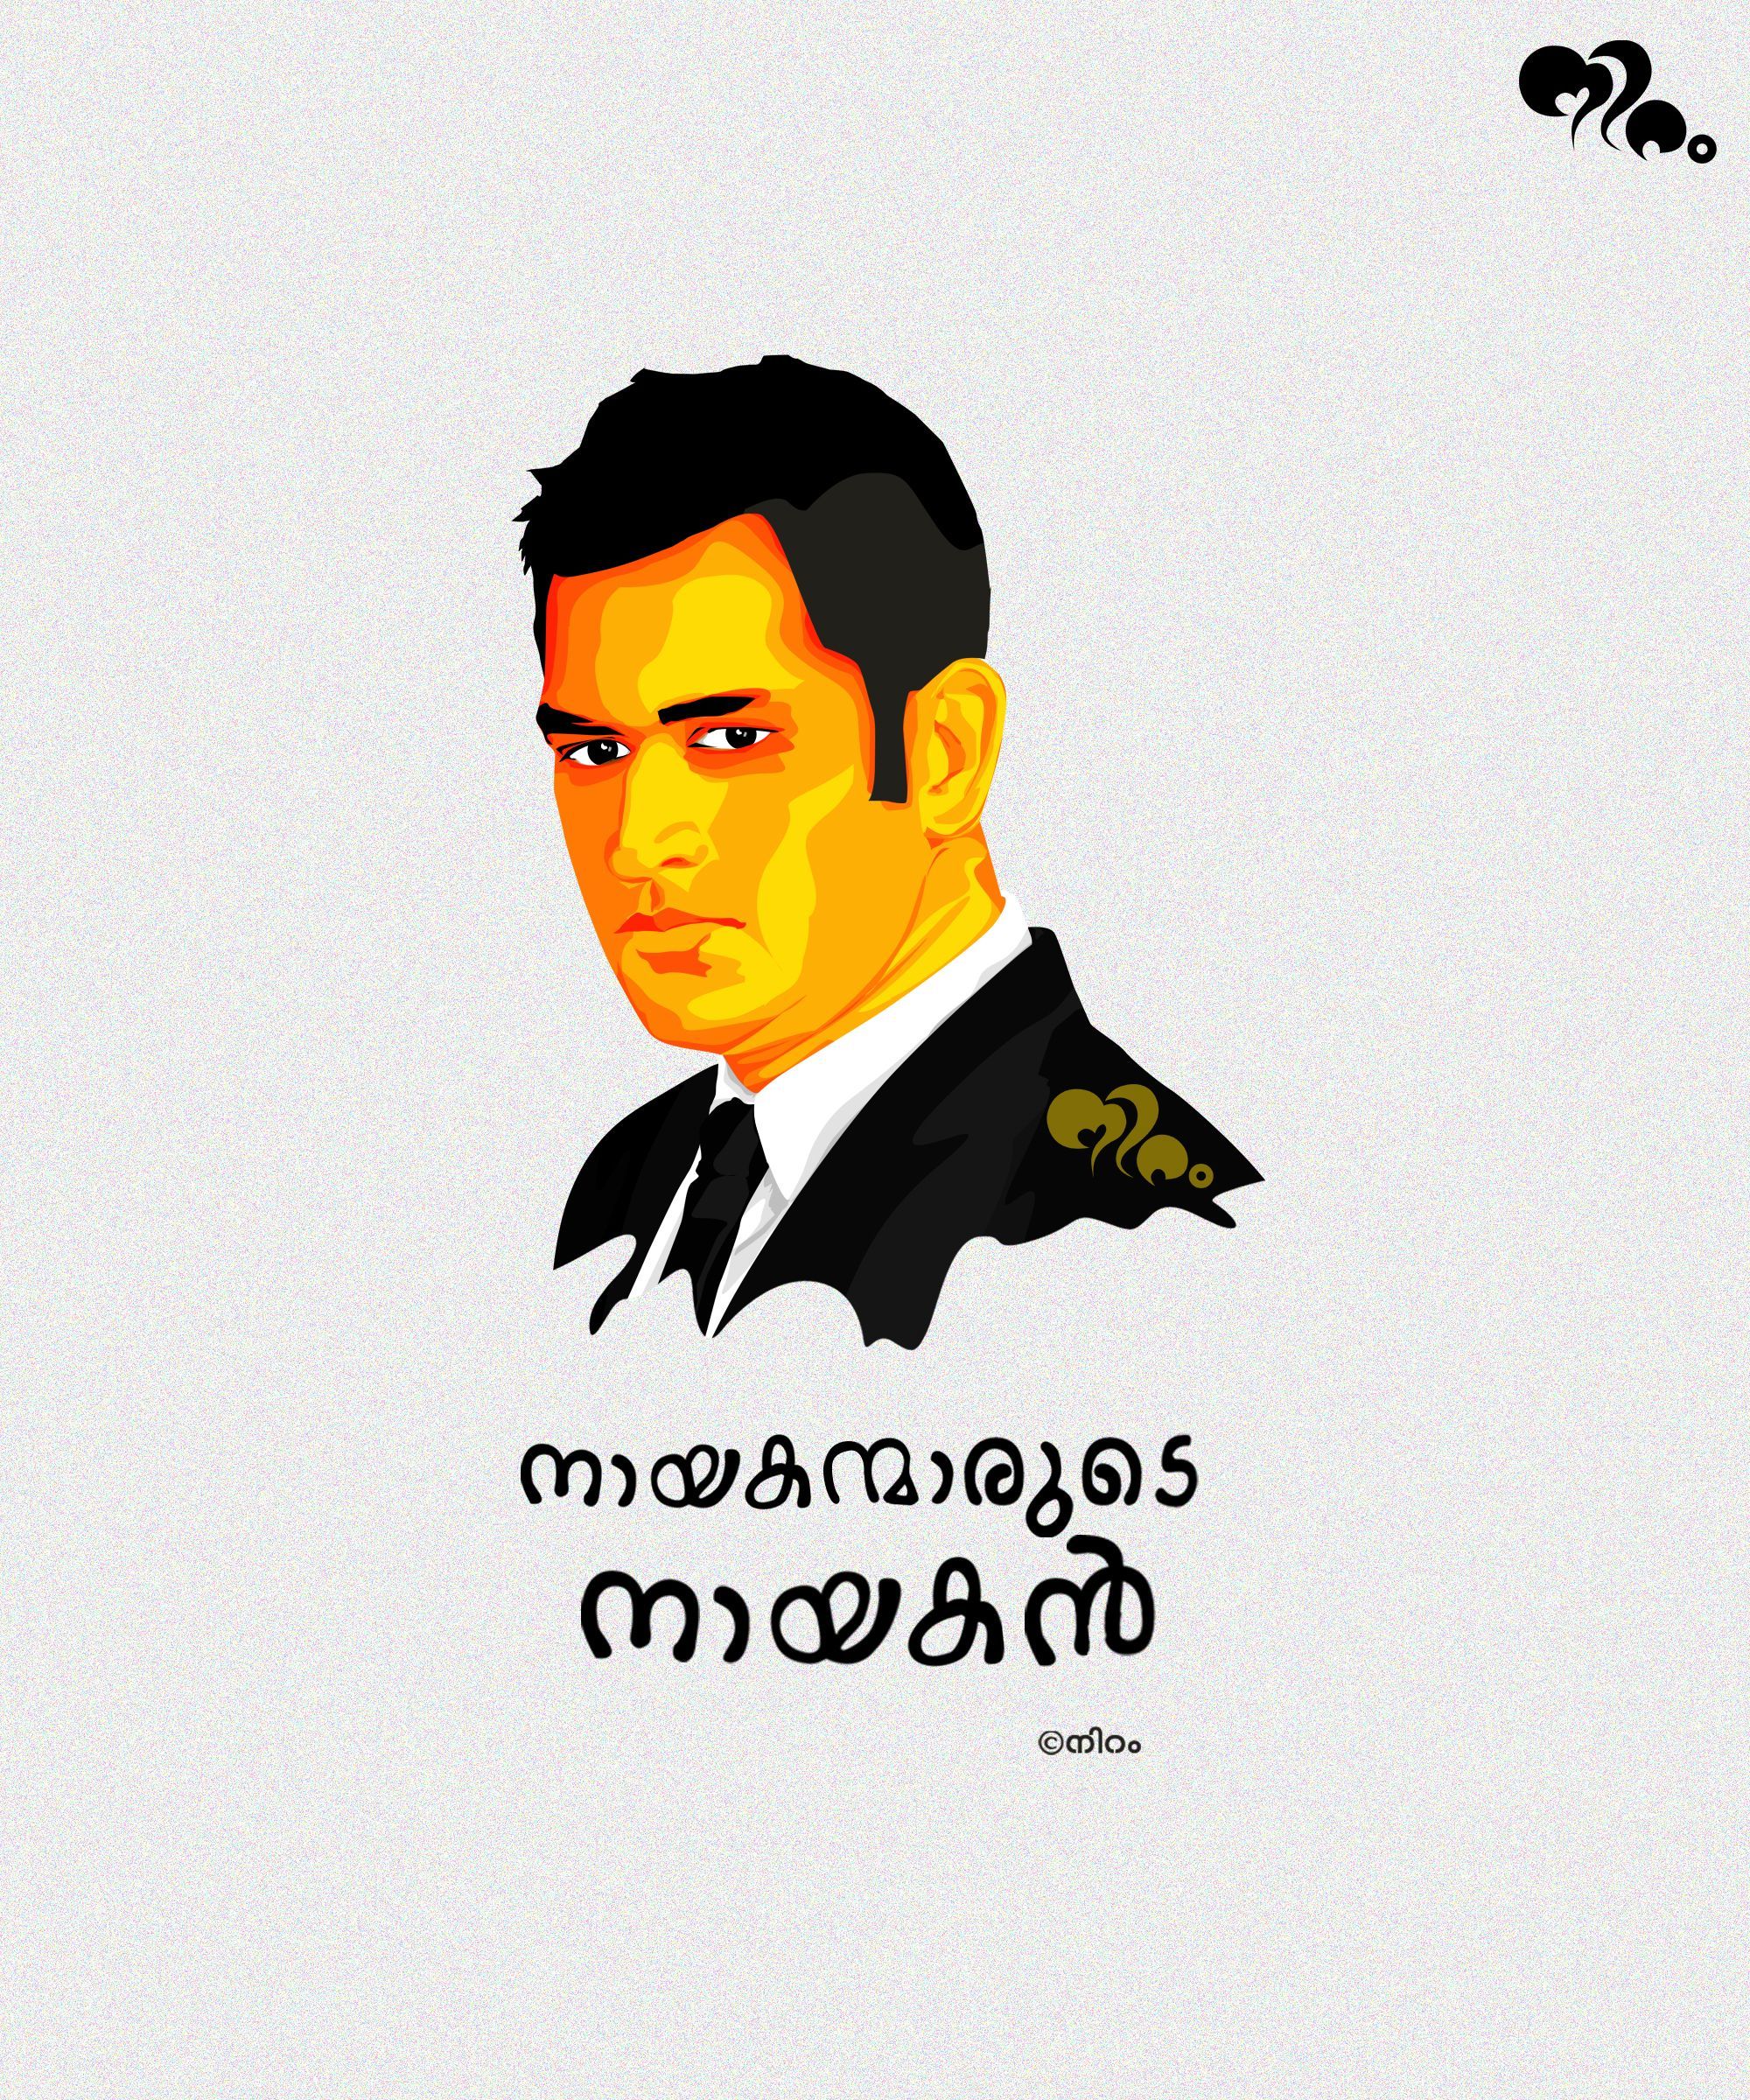 M S Dhoni Captian cool. Typography graphic, Graphic design